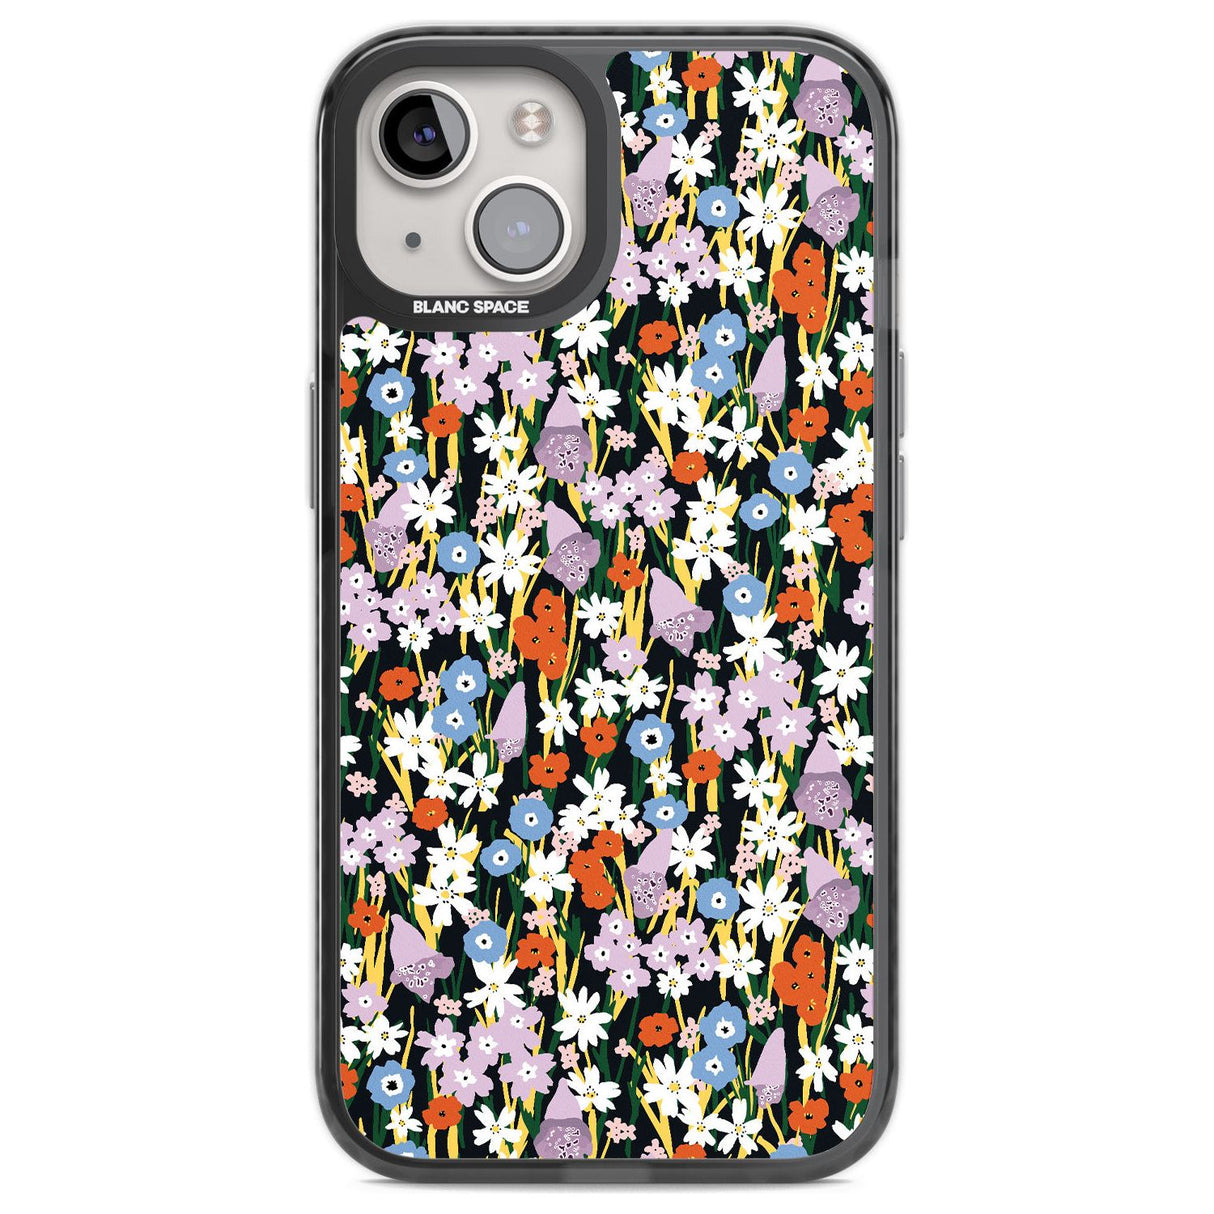 Energetic Floral Mix: Solid Phone Case iPhone 12 / Black Impact Case,iPhone 13 / Black Impact Case,iPhone 12 Pro / Black Impact Case,iPhone 14 / Black Impact Case,iPhone 15 Plus / Black Impact Case,iPhone 15 / Black Impact Case Blanc Space